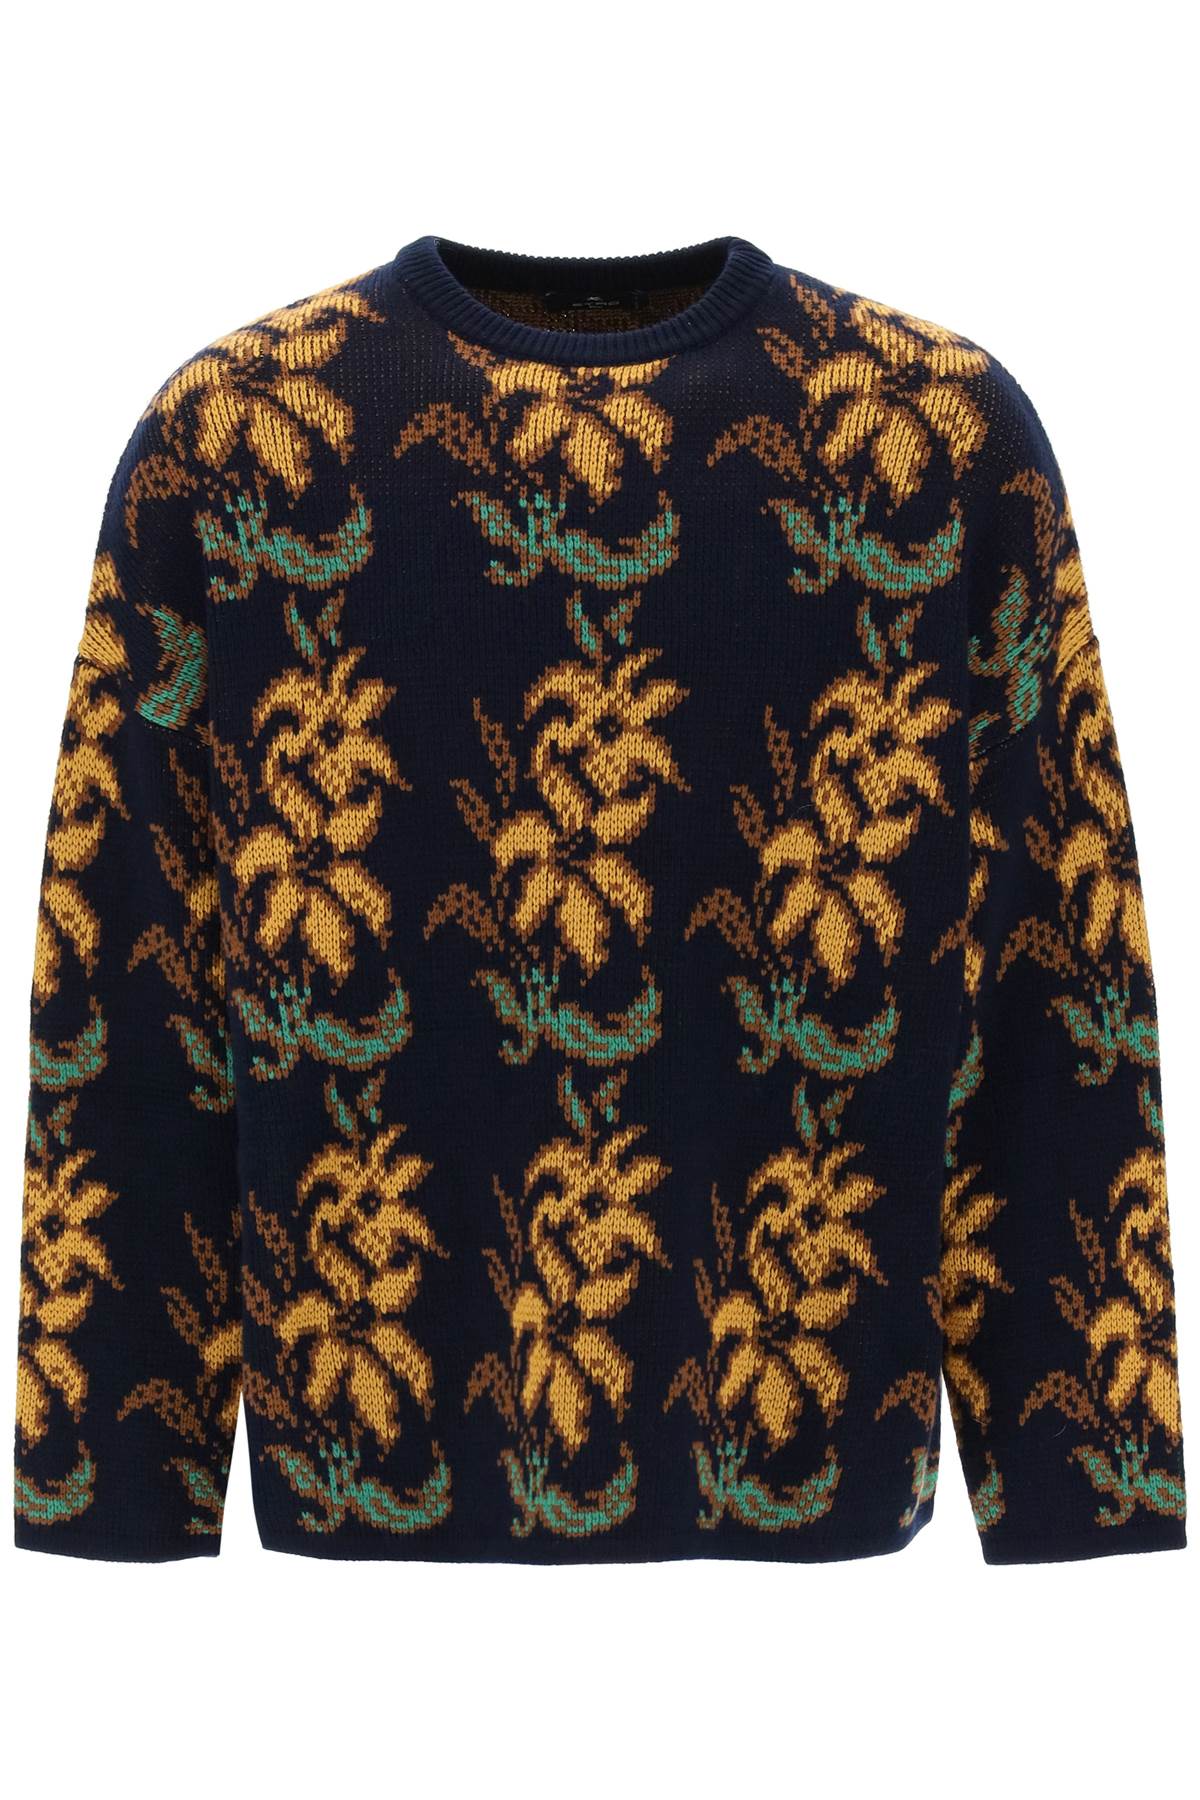 Etro sweater with floral pattern-0